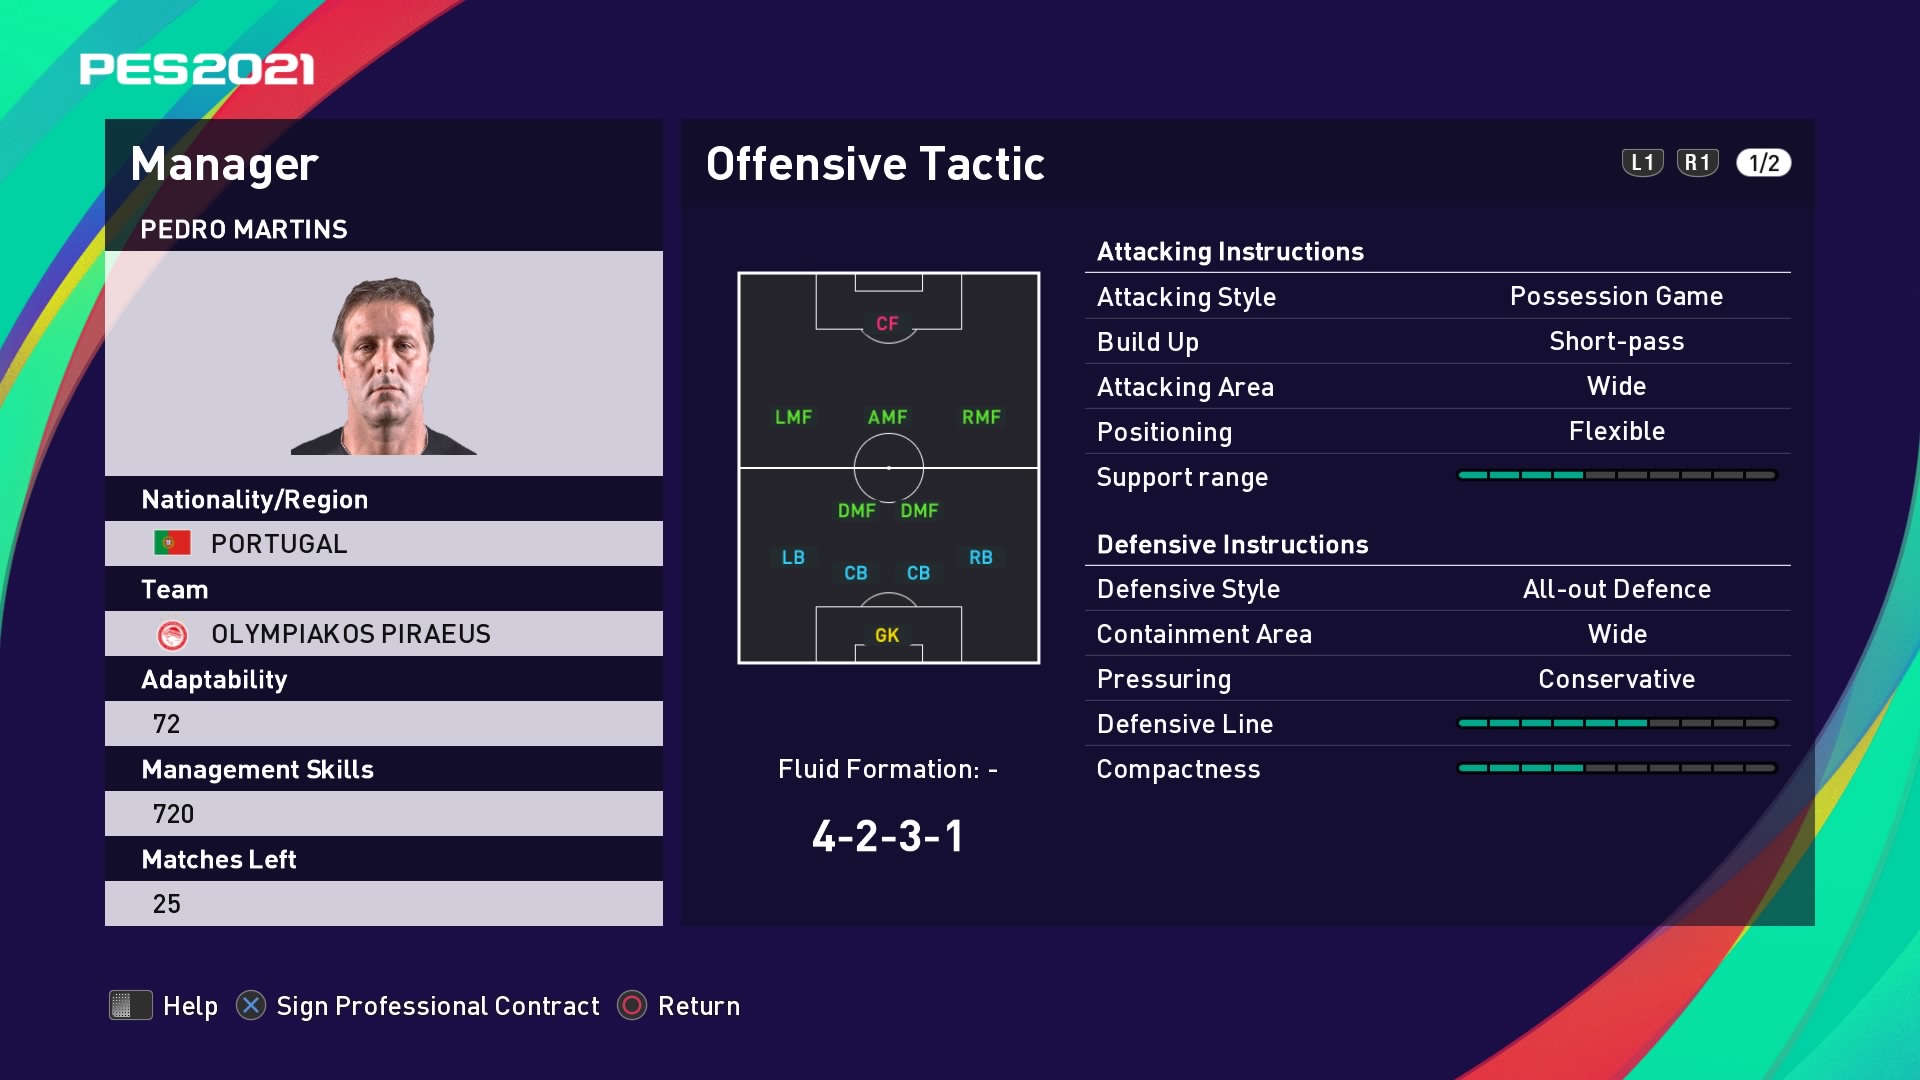 Pedro Martins Offensive Tactic in PES 2021 myClub